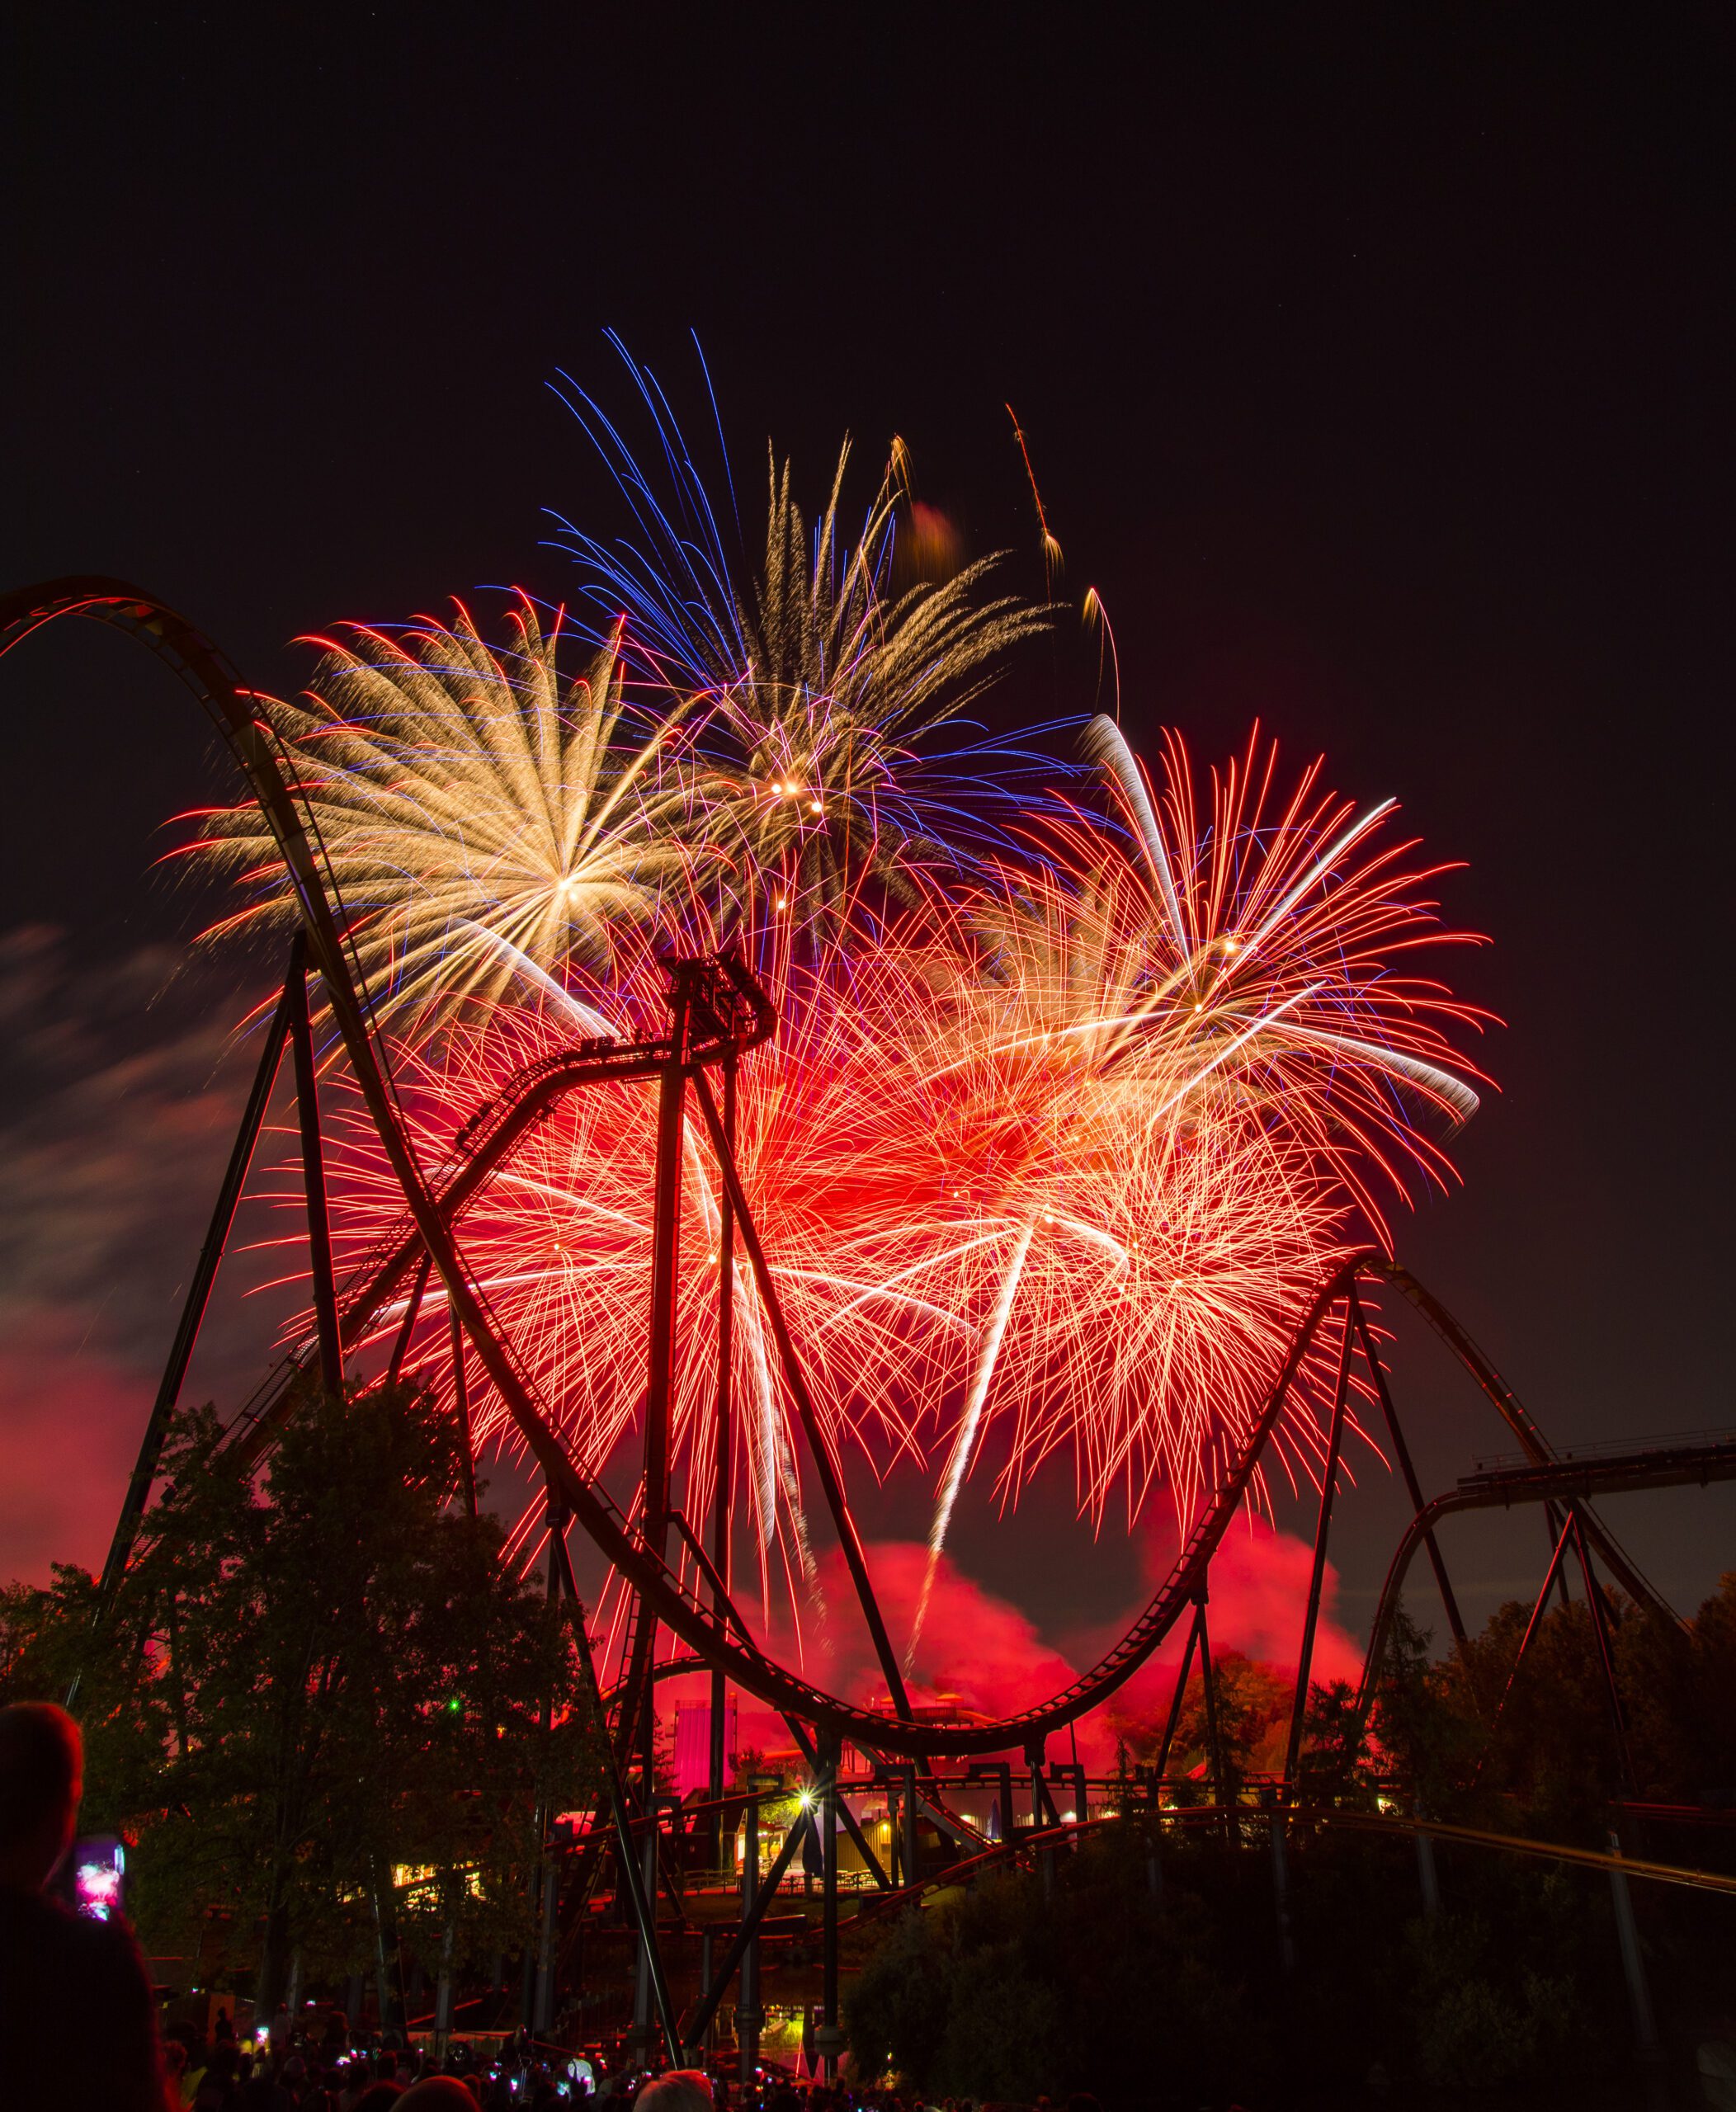 Red and yellow fireworks in a dark sky with the silhouette of a roller coaster in the forefront.